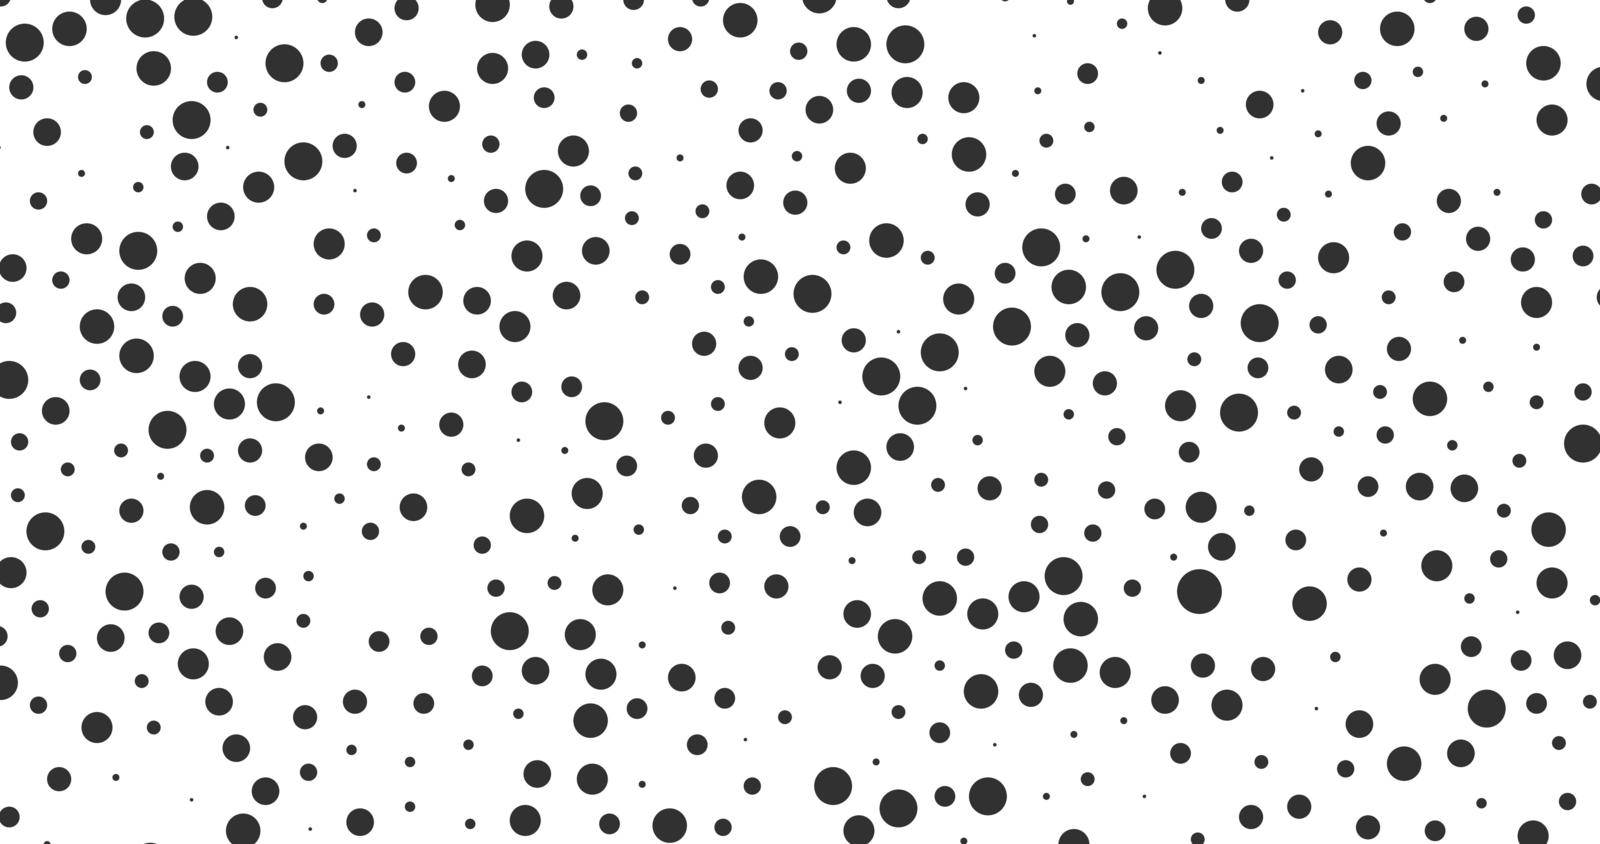 Dots or spots abstract background. Vector illustration